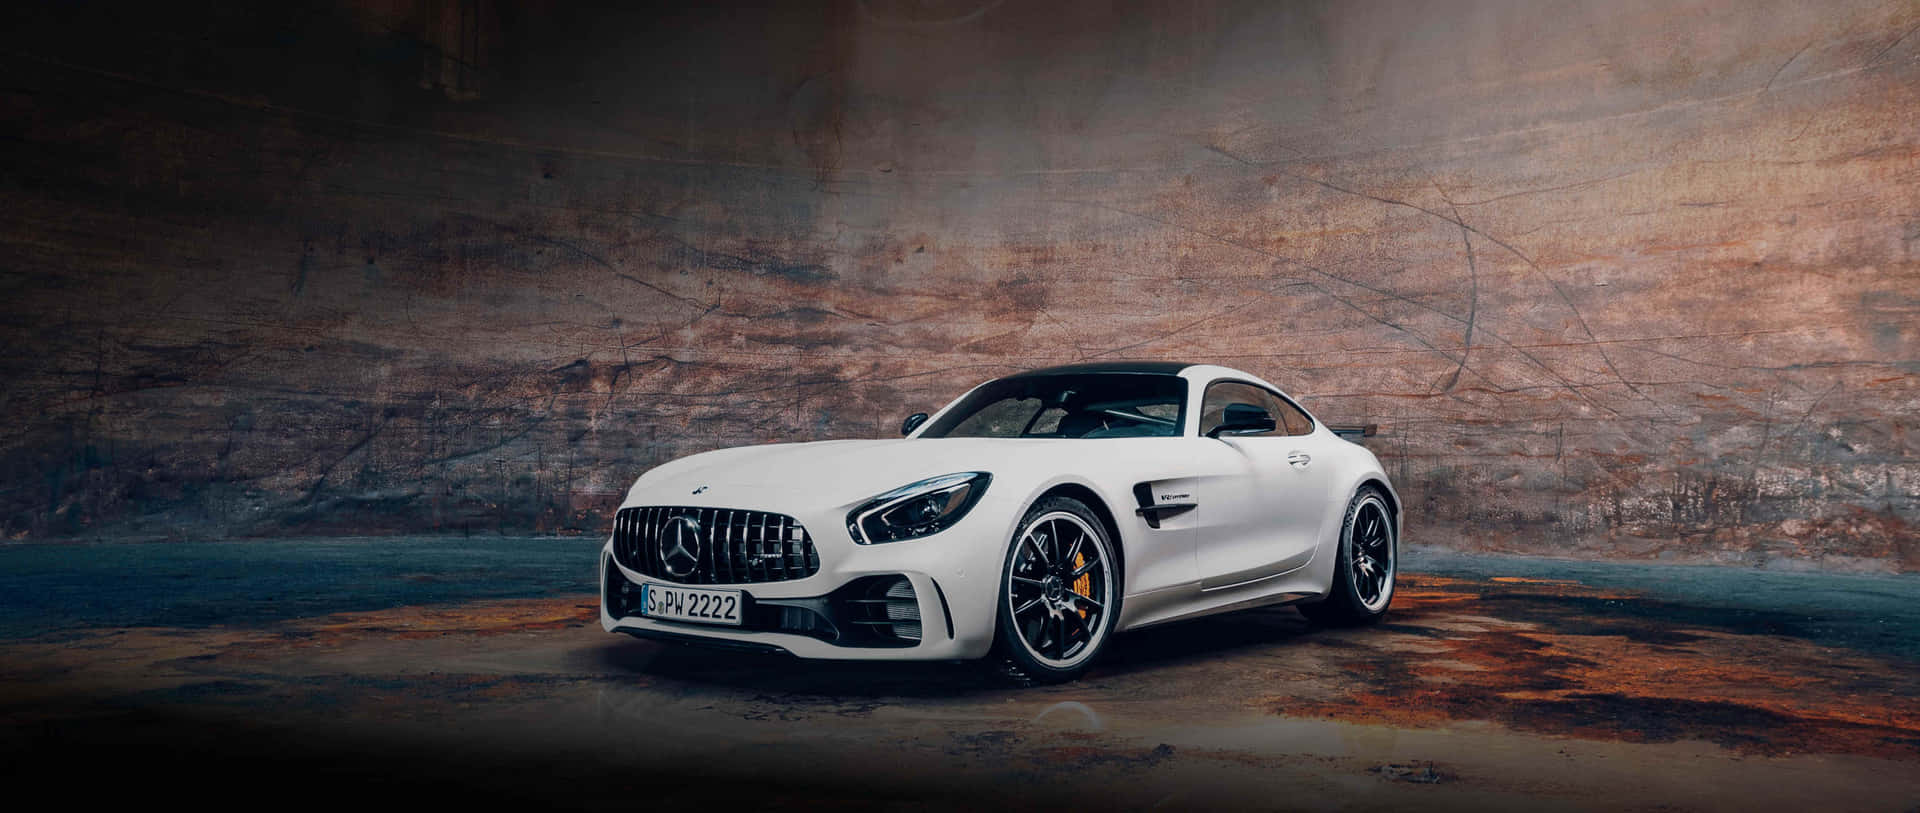 White Mercedes Amg Gt R Cave Background